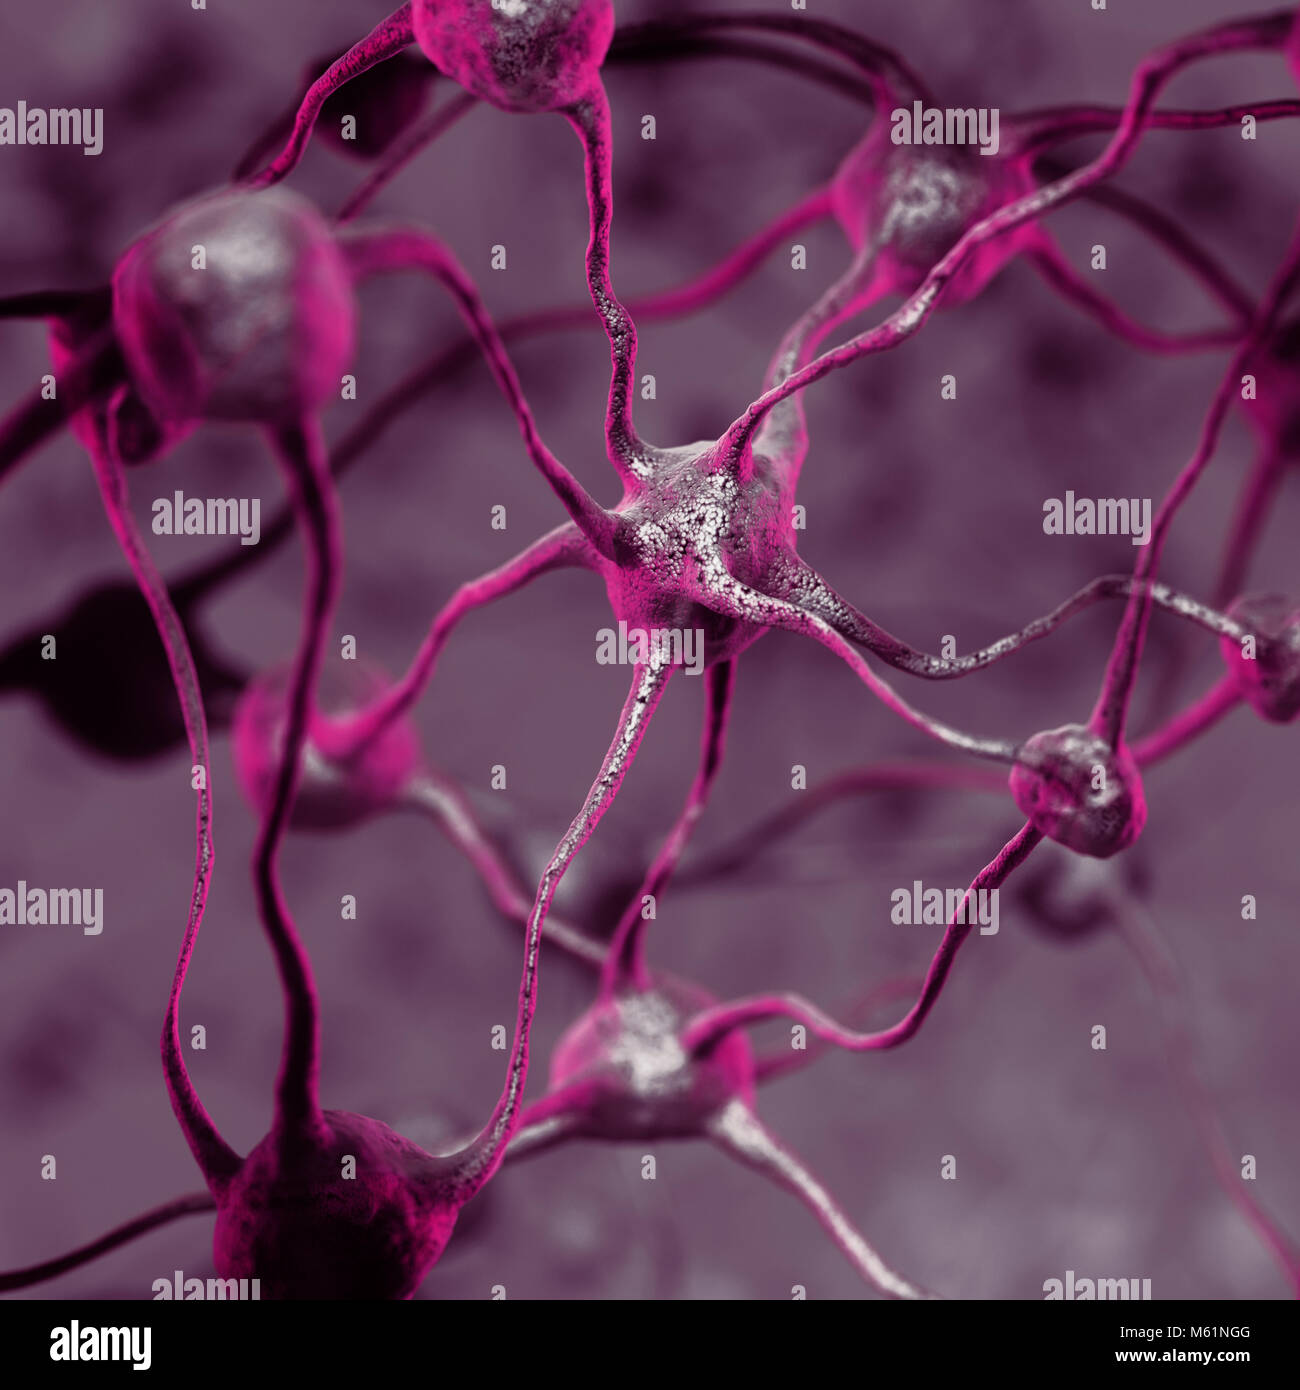 Model of a Biological Neural network of the human brain, interconnected neurons, brain cells and connections, scientific 3D illustration in purple col Stock Photo